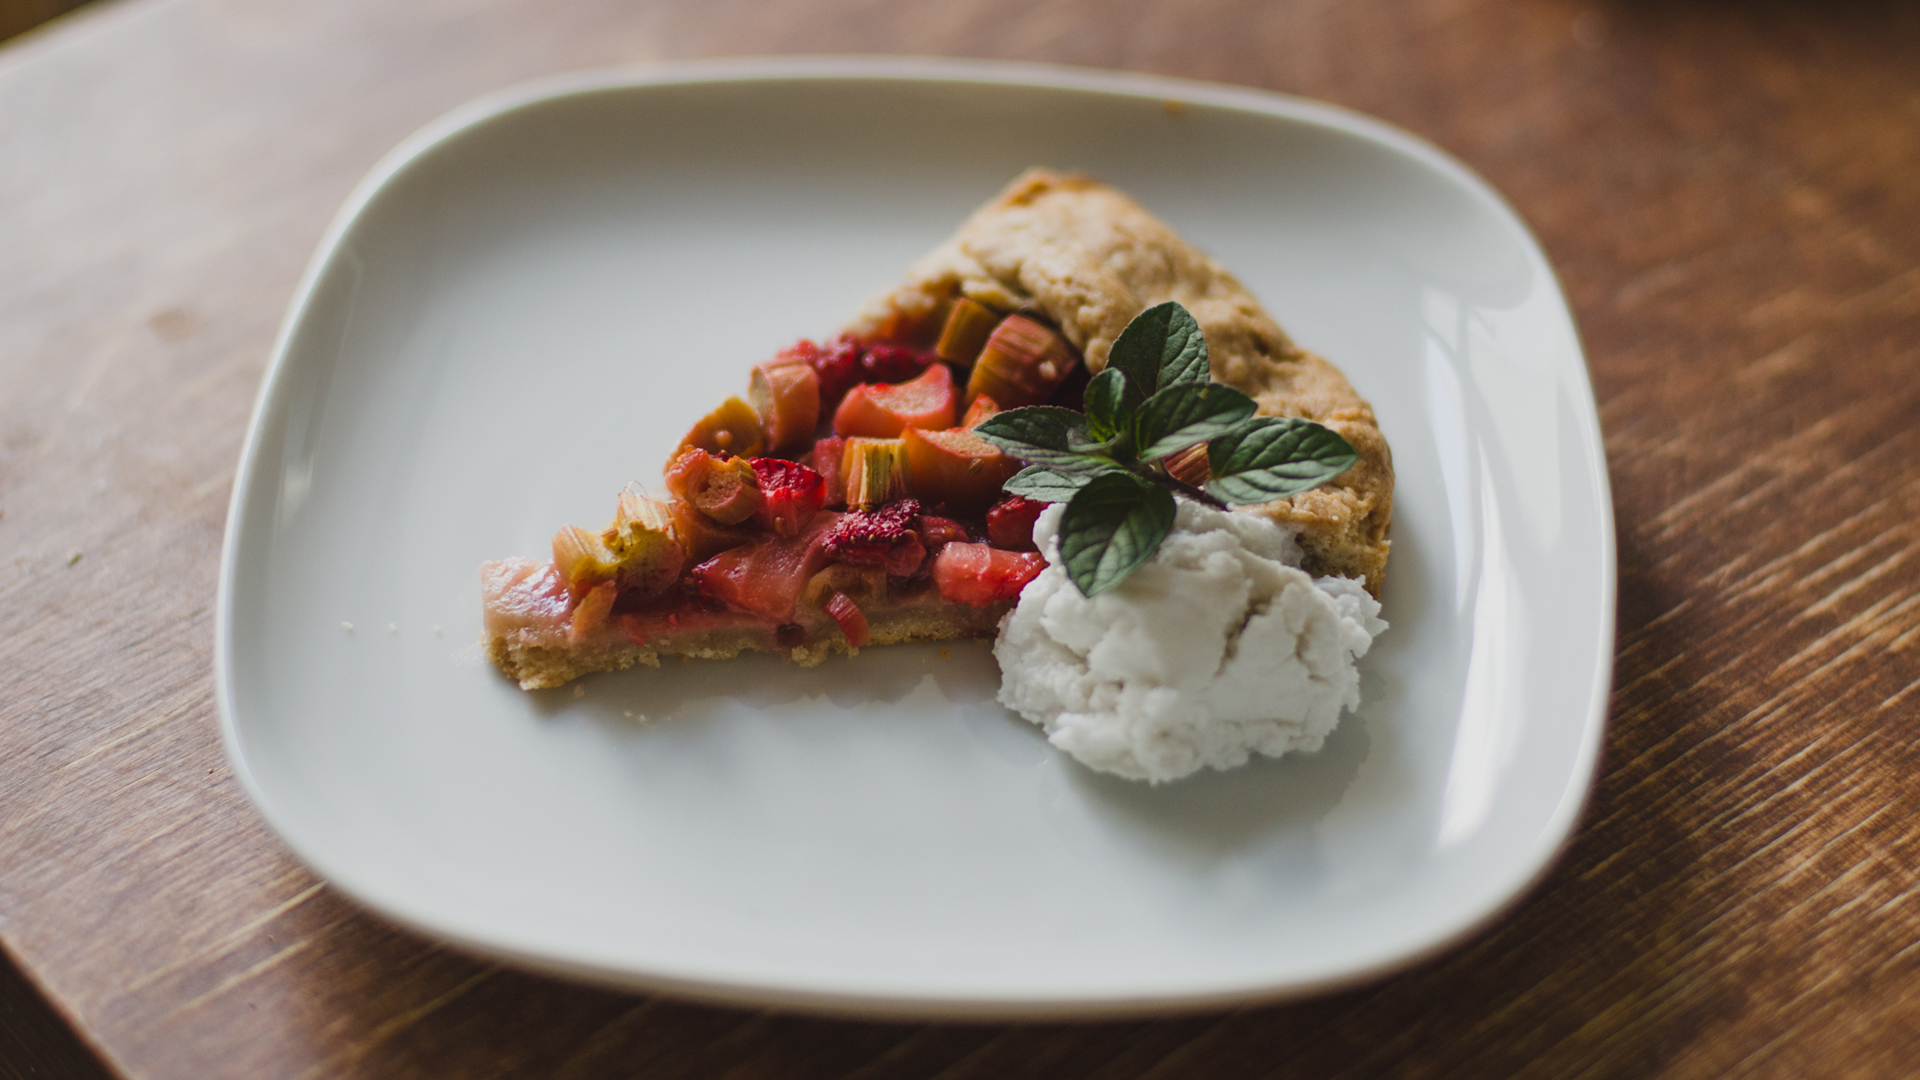 Isabella Paulsen prepares Fructopia's recipe for Rhubarb and Strawberry Galette.